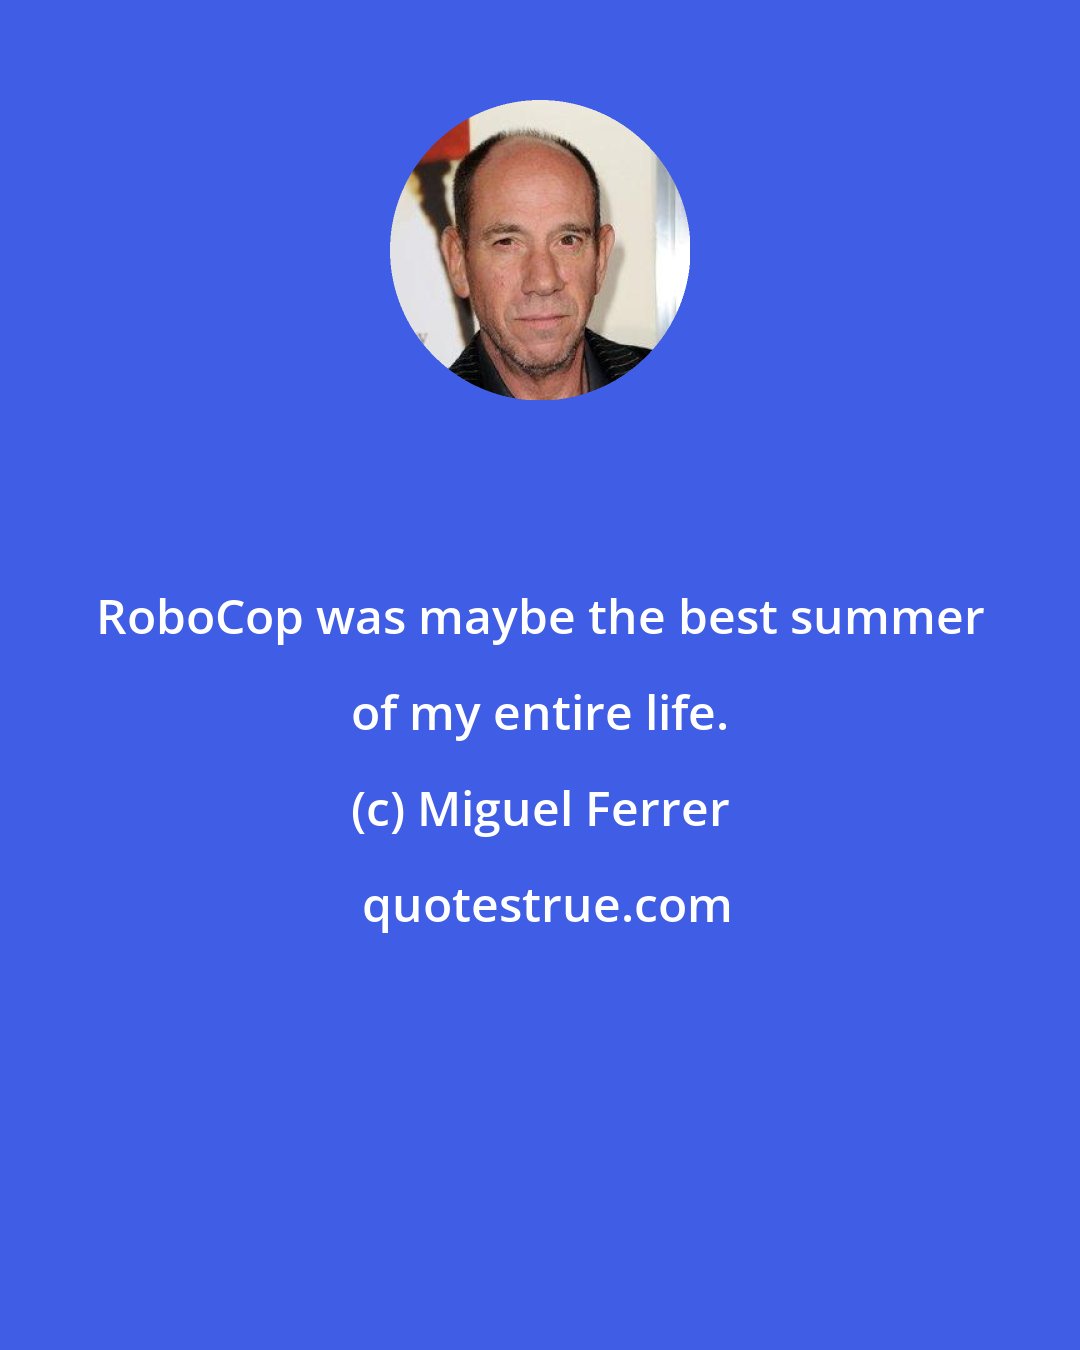 Miguel Ferrer: RoboCop was maybe the best summer of my entire life.